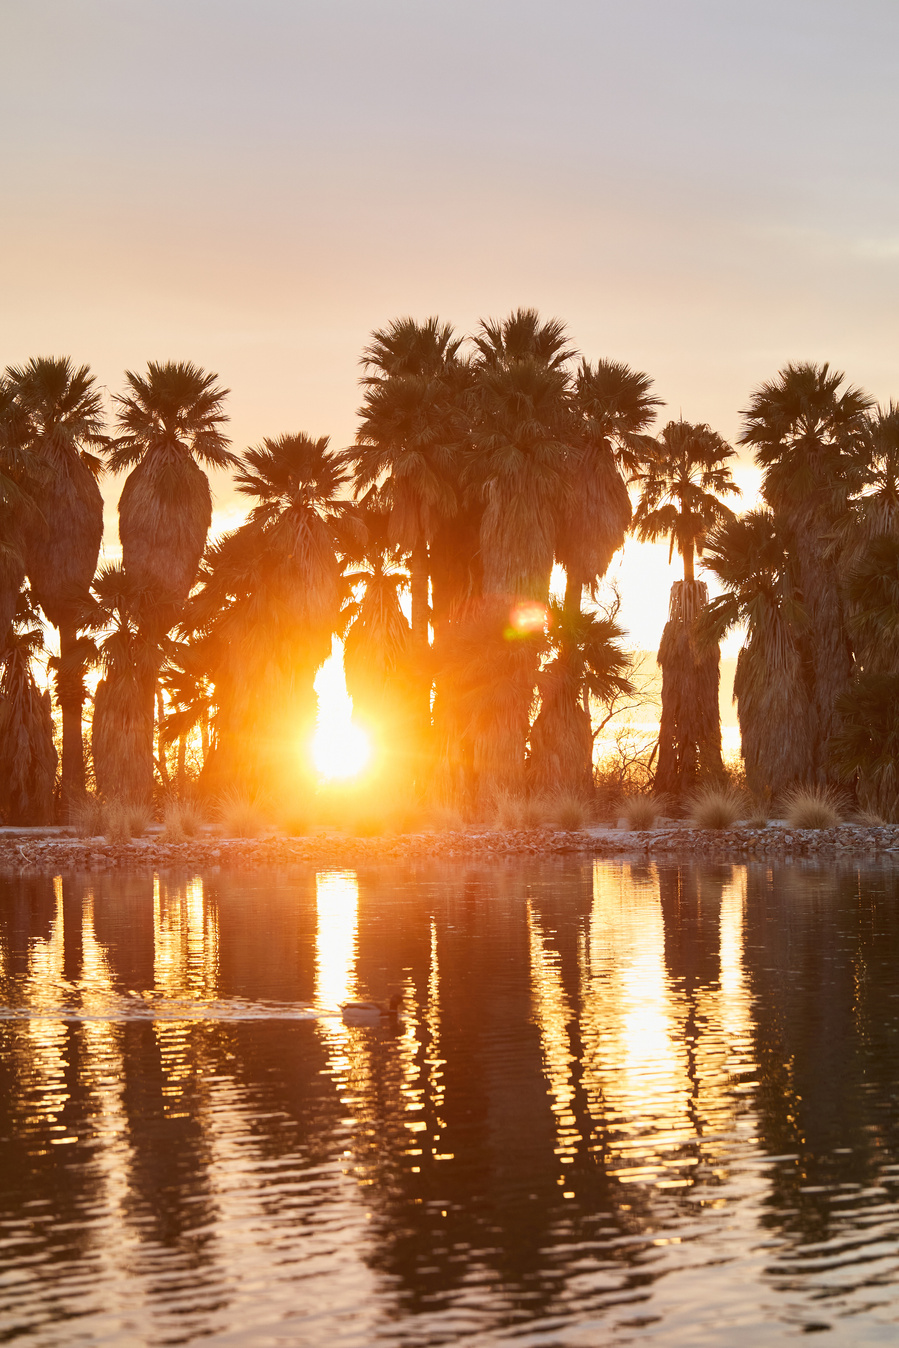 Sun setting across a lake with palm trees. Lifestyle fashion photography for The Buckle